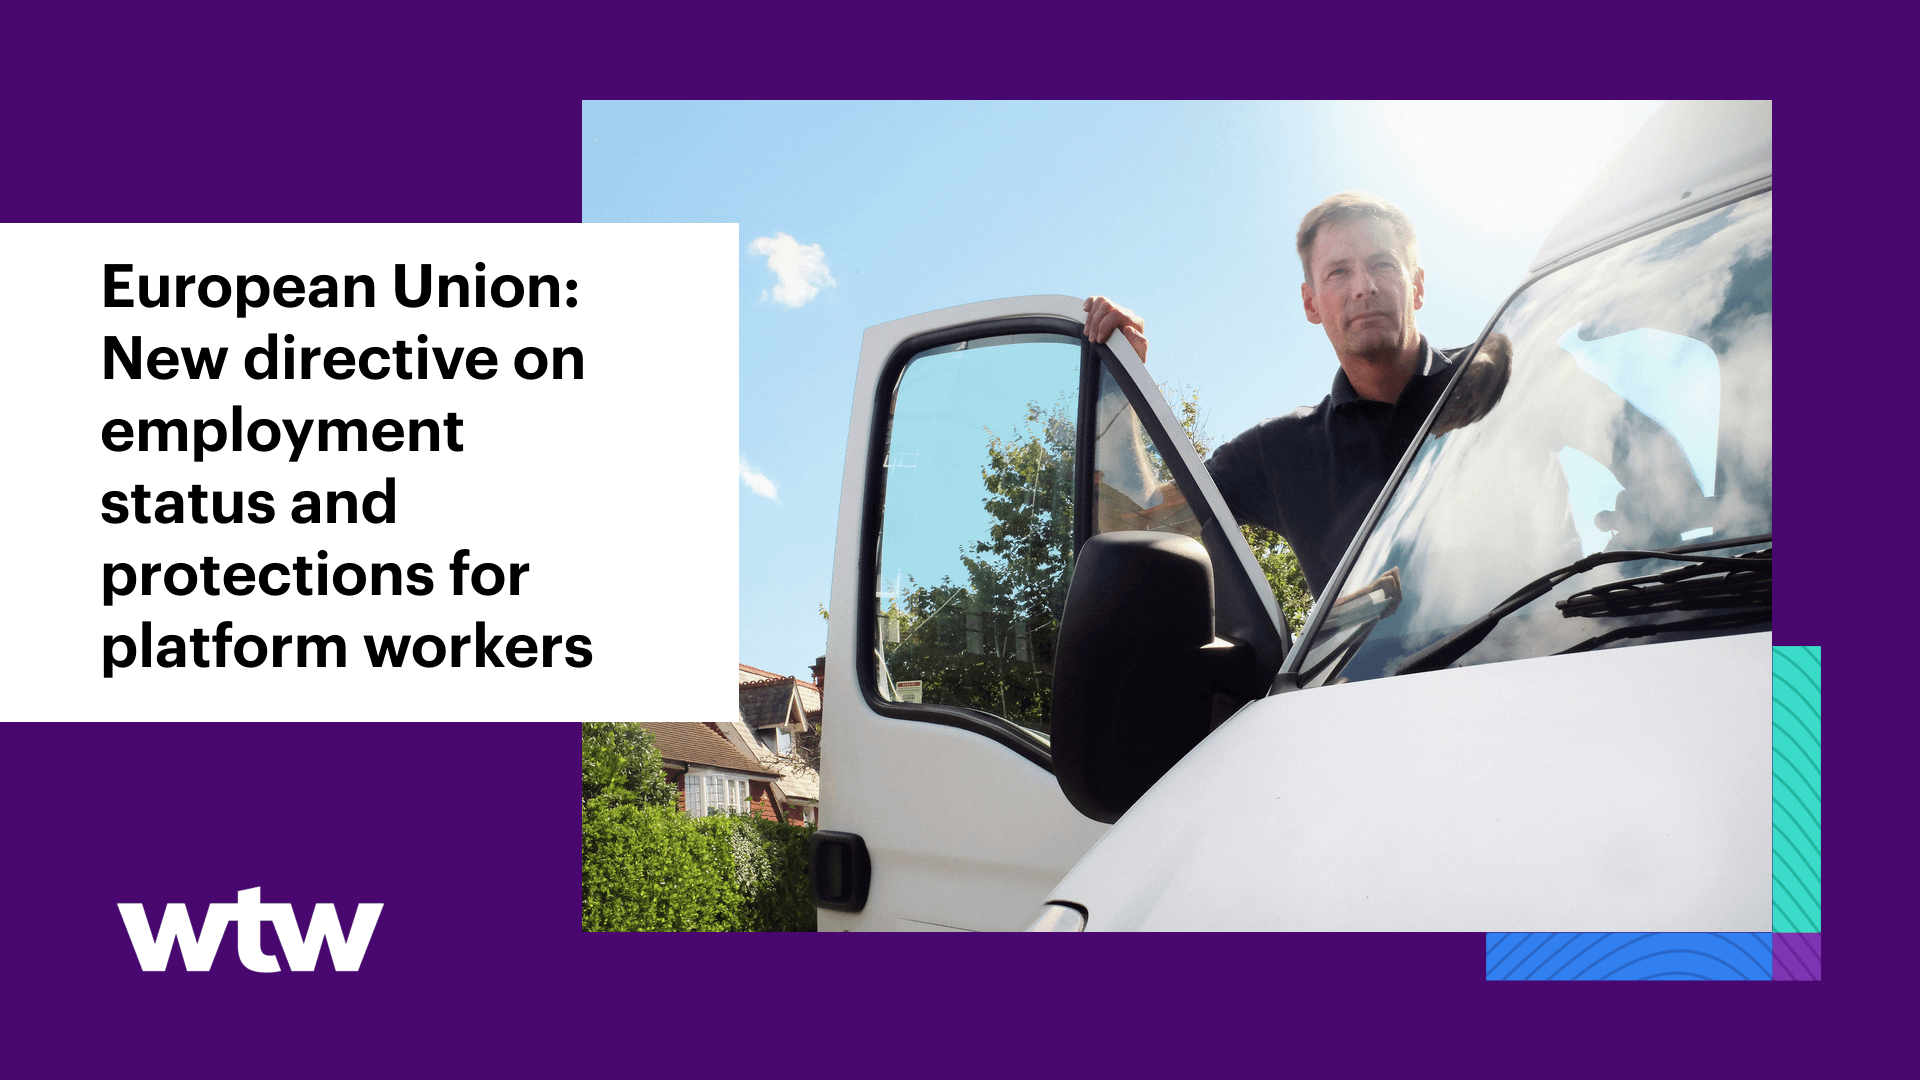 European Union: New directive on employment status and protections for platform workers